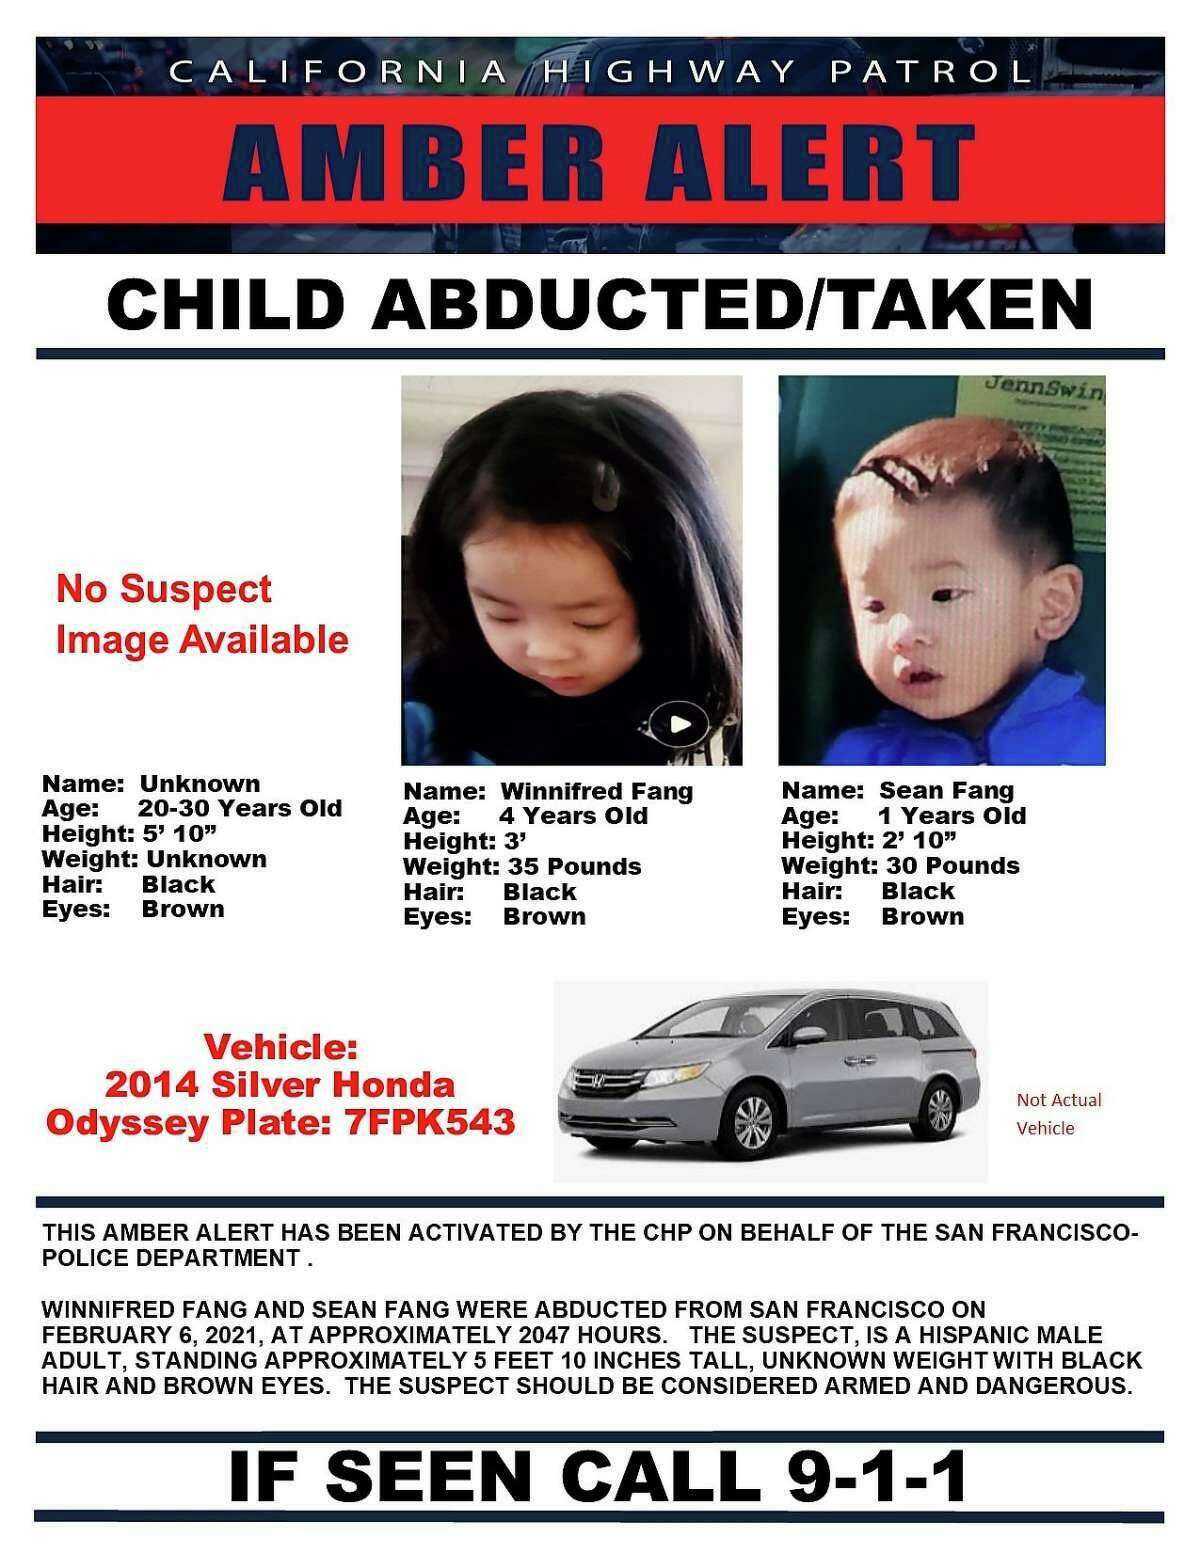 California Highway Patrol issued an Amber Alert for two children, Winnifred Fang, age 4 and Sean Fang, age 1, who were abducted in a San Francisco carjacking Saturday night.